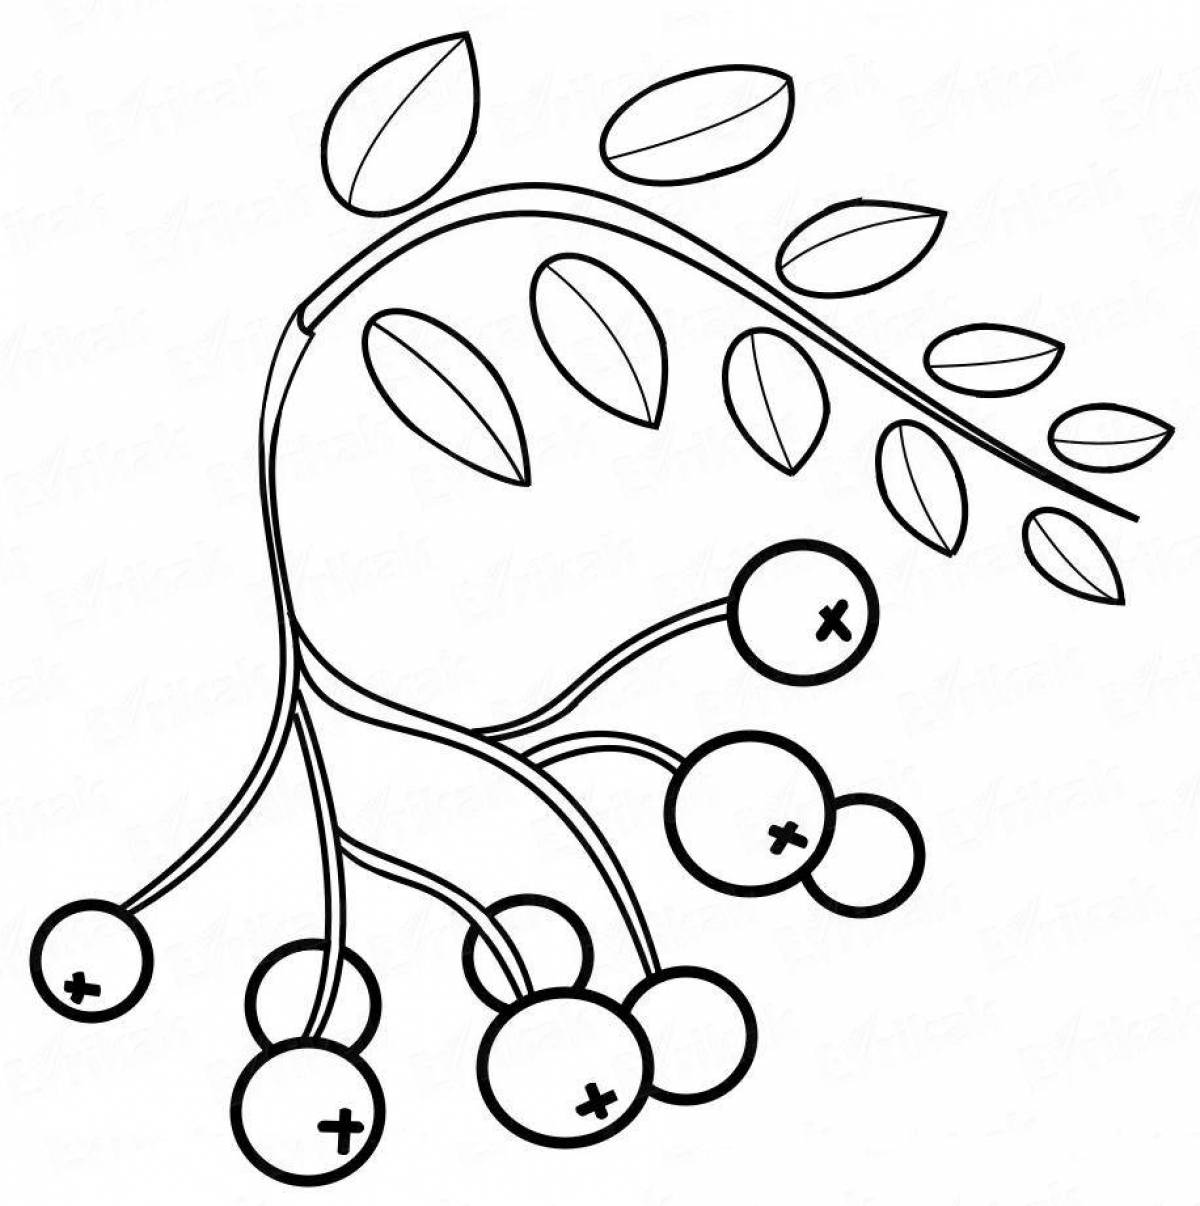 Bright rowan twig coloring for children